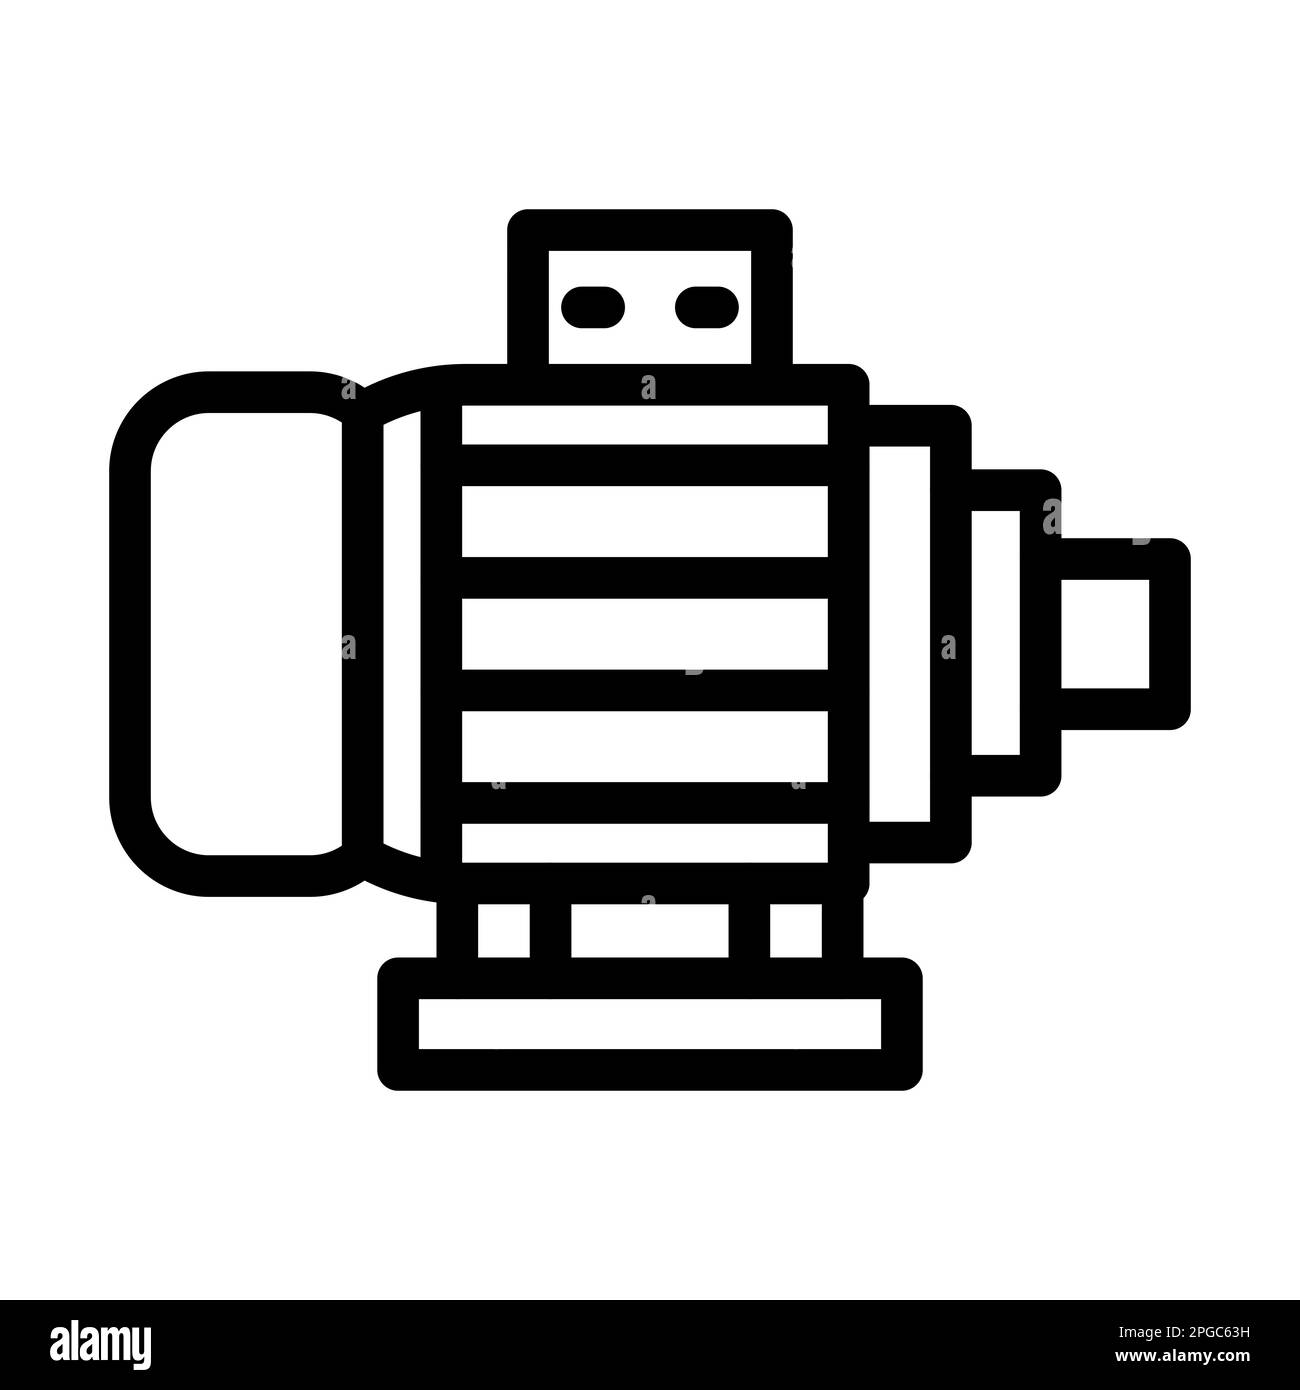 Motor Vector Thick Line Icon For Personal And Commercial Use. Stock Photo